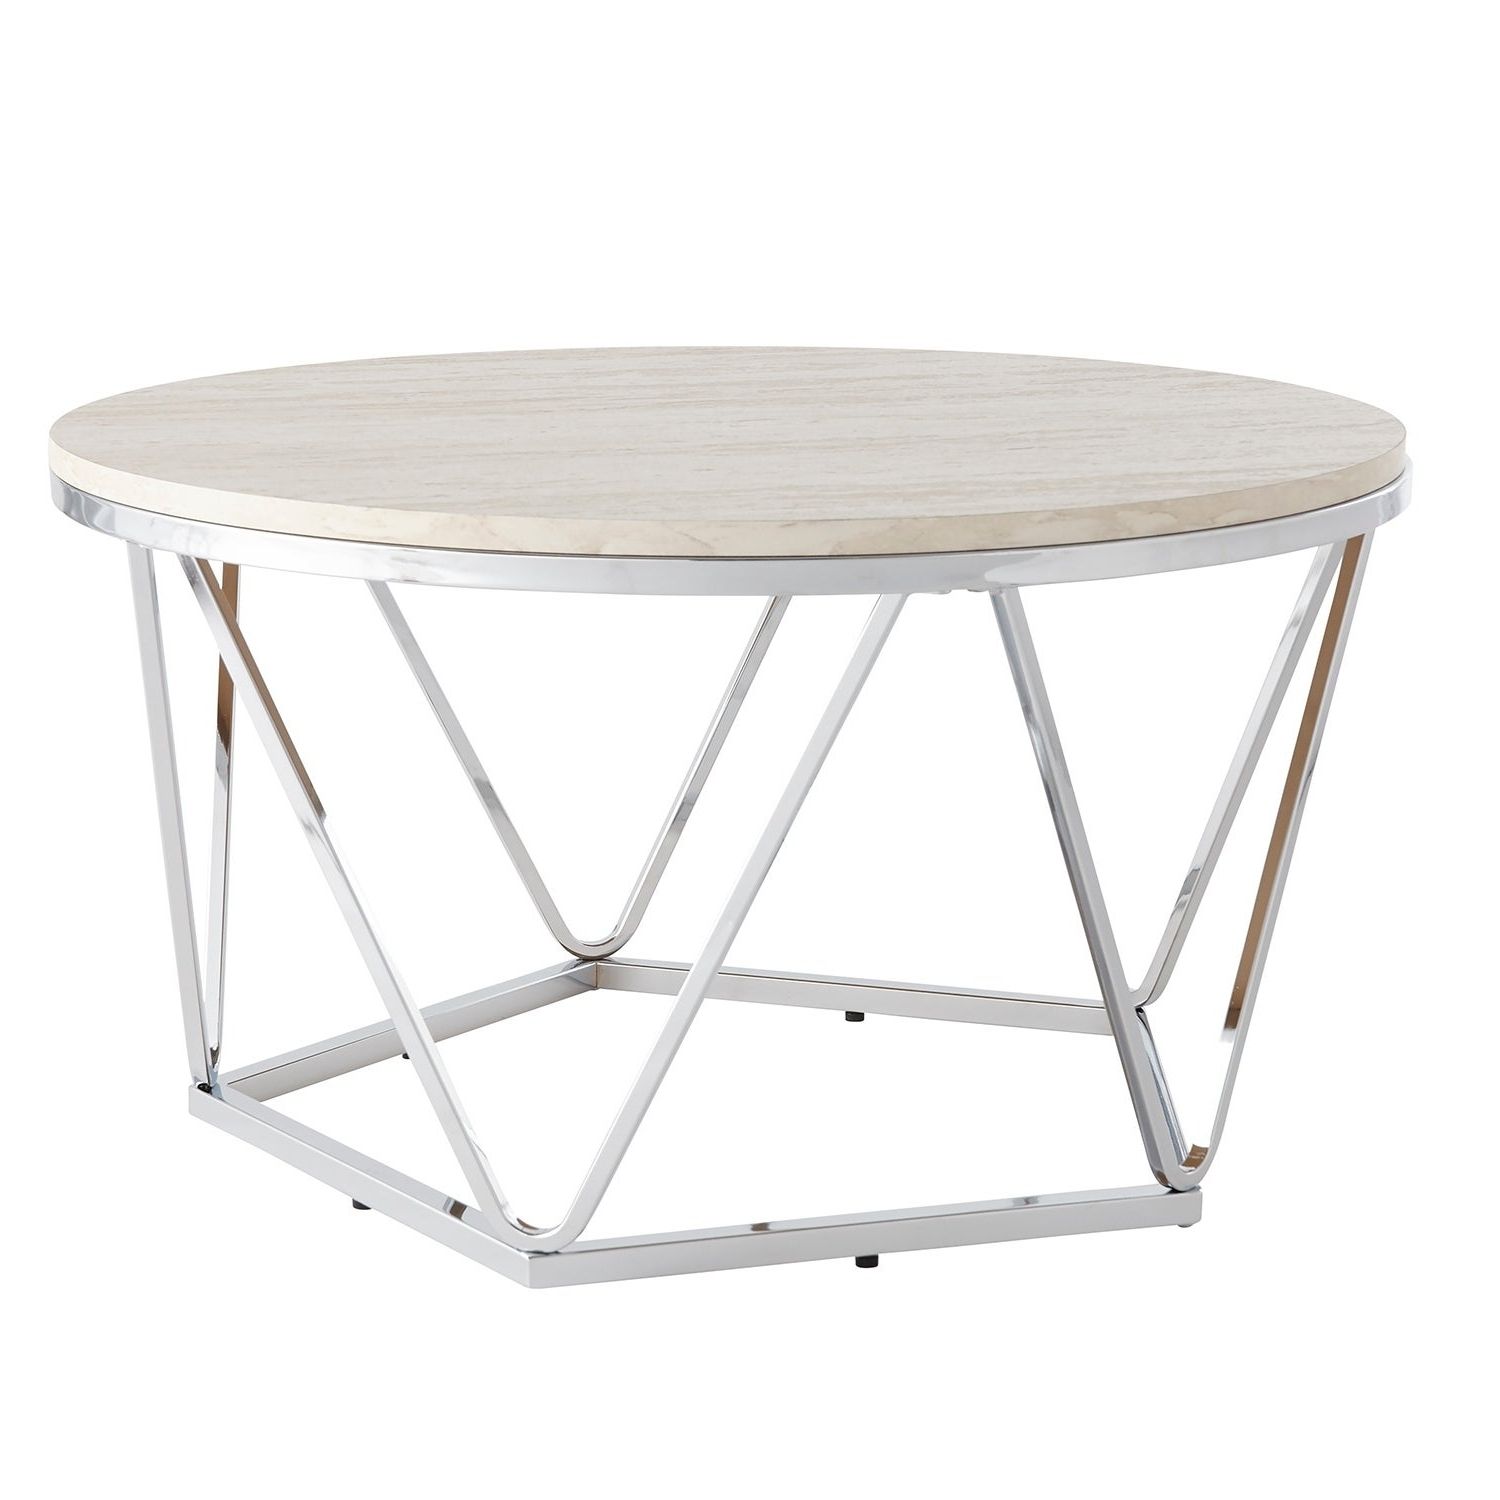 Fashionable Silver Orchid Henderson Faux Stone Silvertone Round Coffee Tables Pertaining To Silver Orchid Henderson Faux Stone Silvertone Round Coffee Table (View 7 of 20)